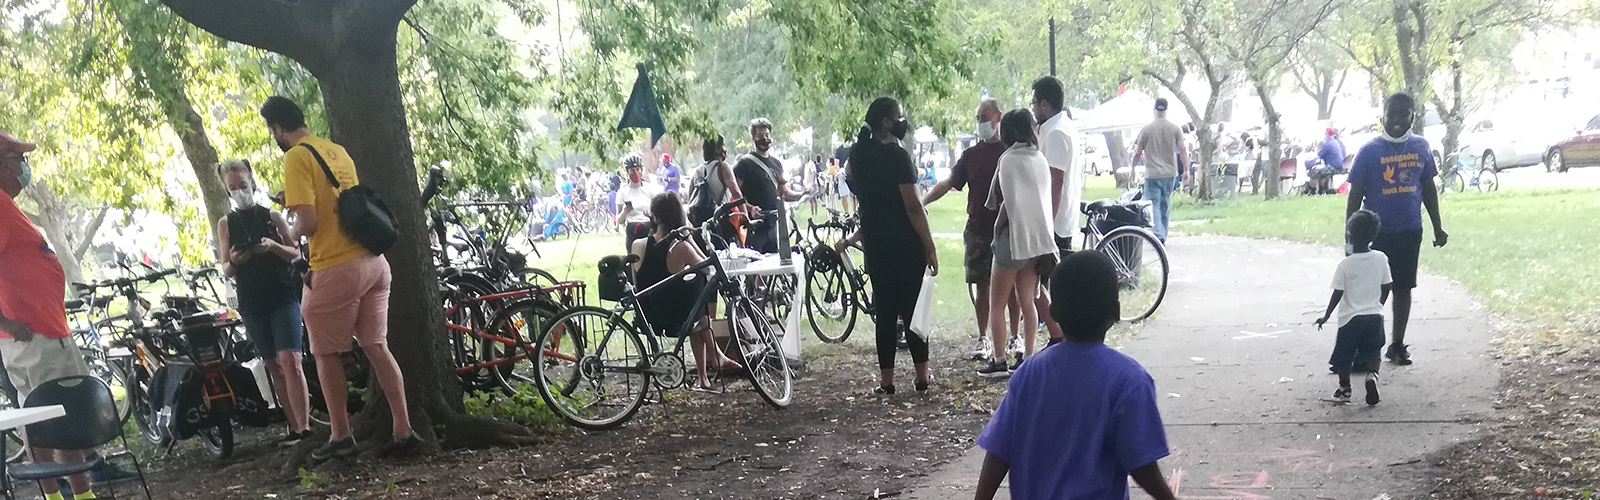 Kid walking away from viewer on sidewalk through park with bikes parked on grass